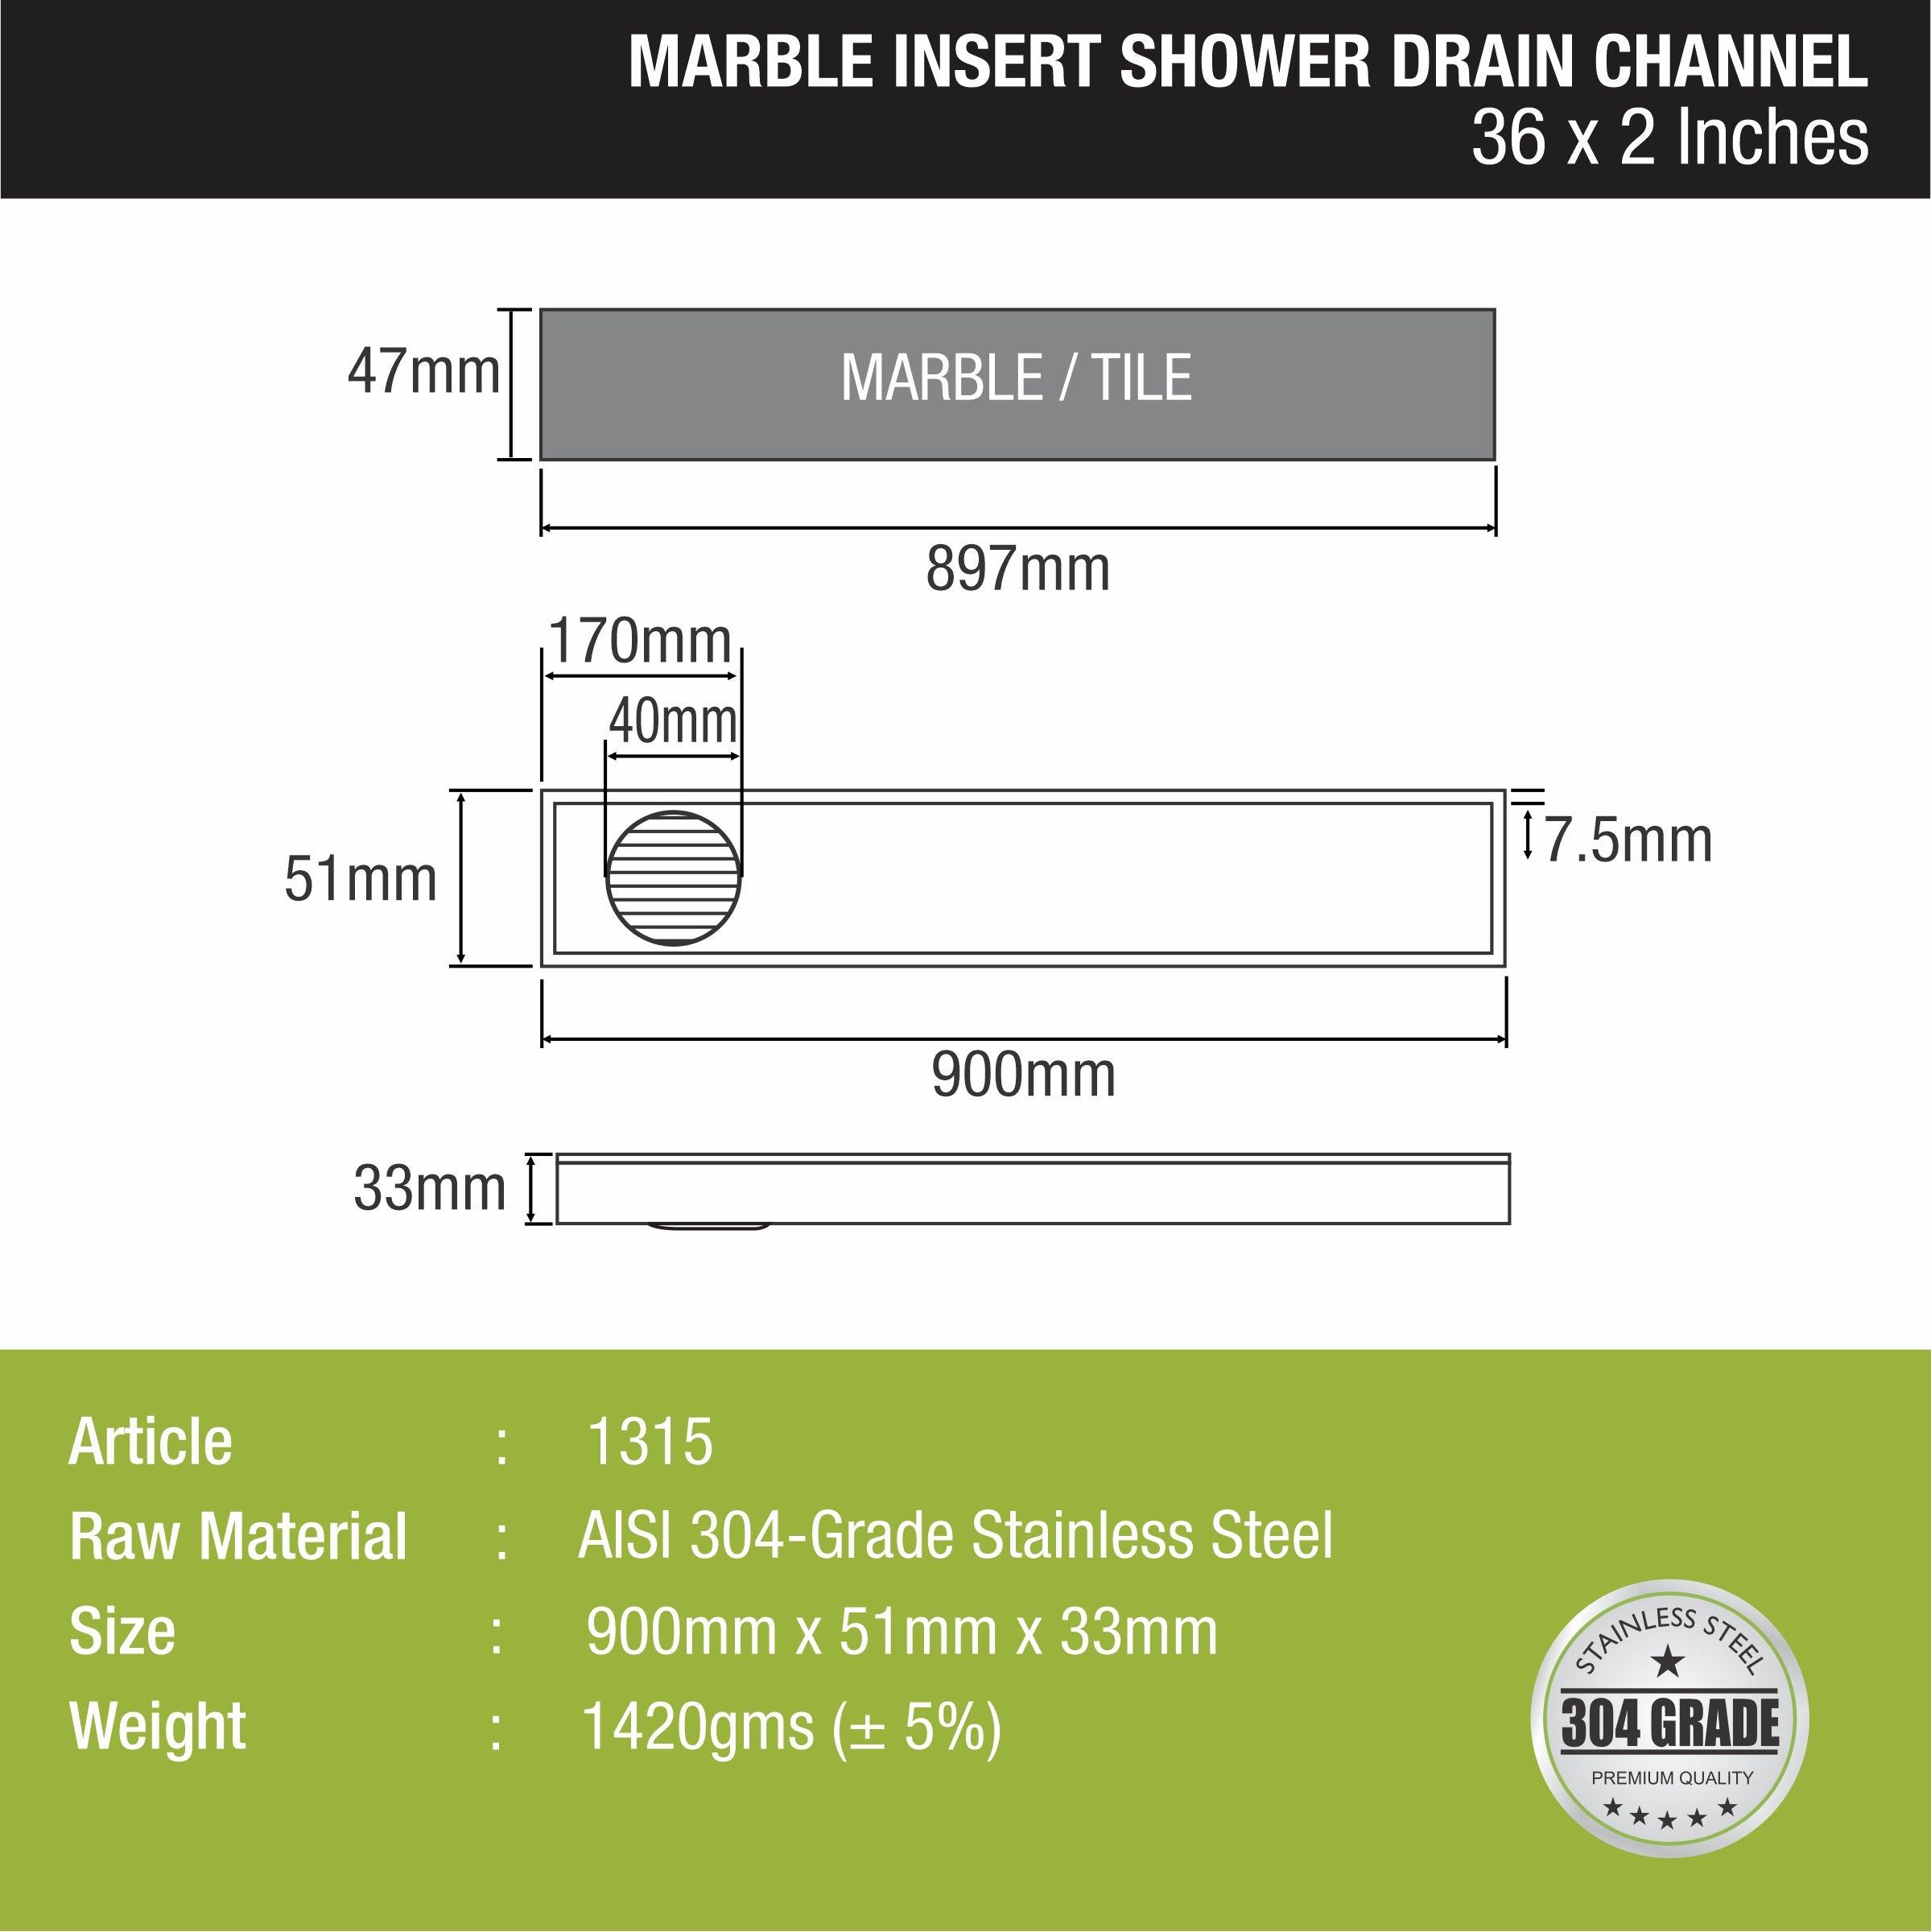 Marble Insert Shower Drain Channel (36 x 2 Inches) sizes and dimensions